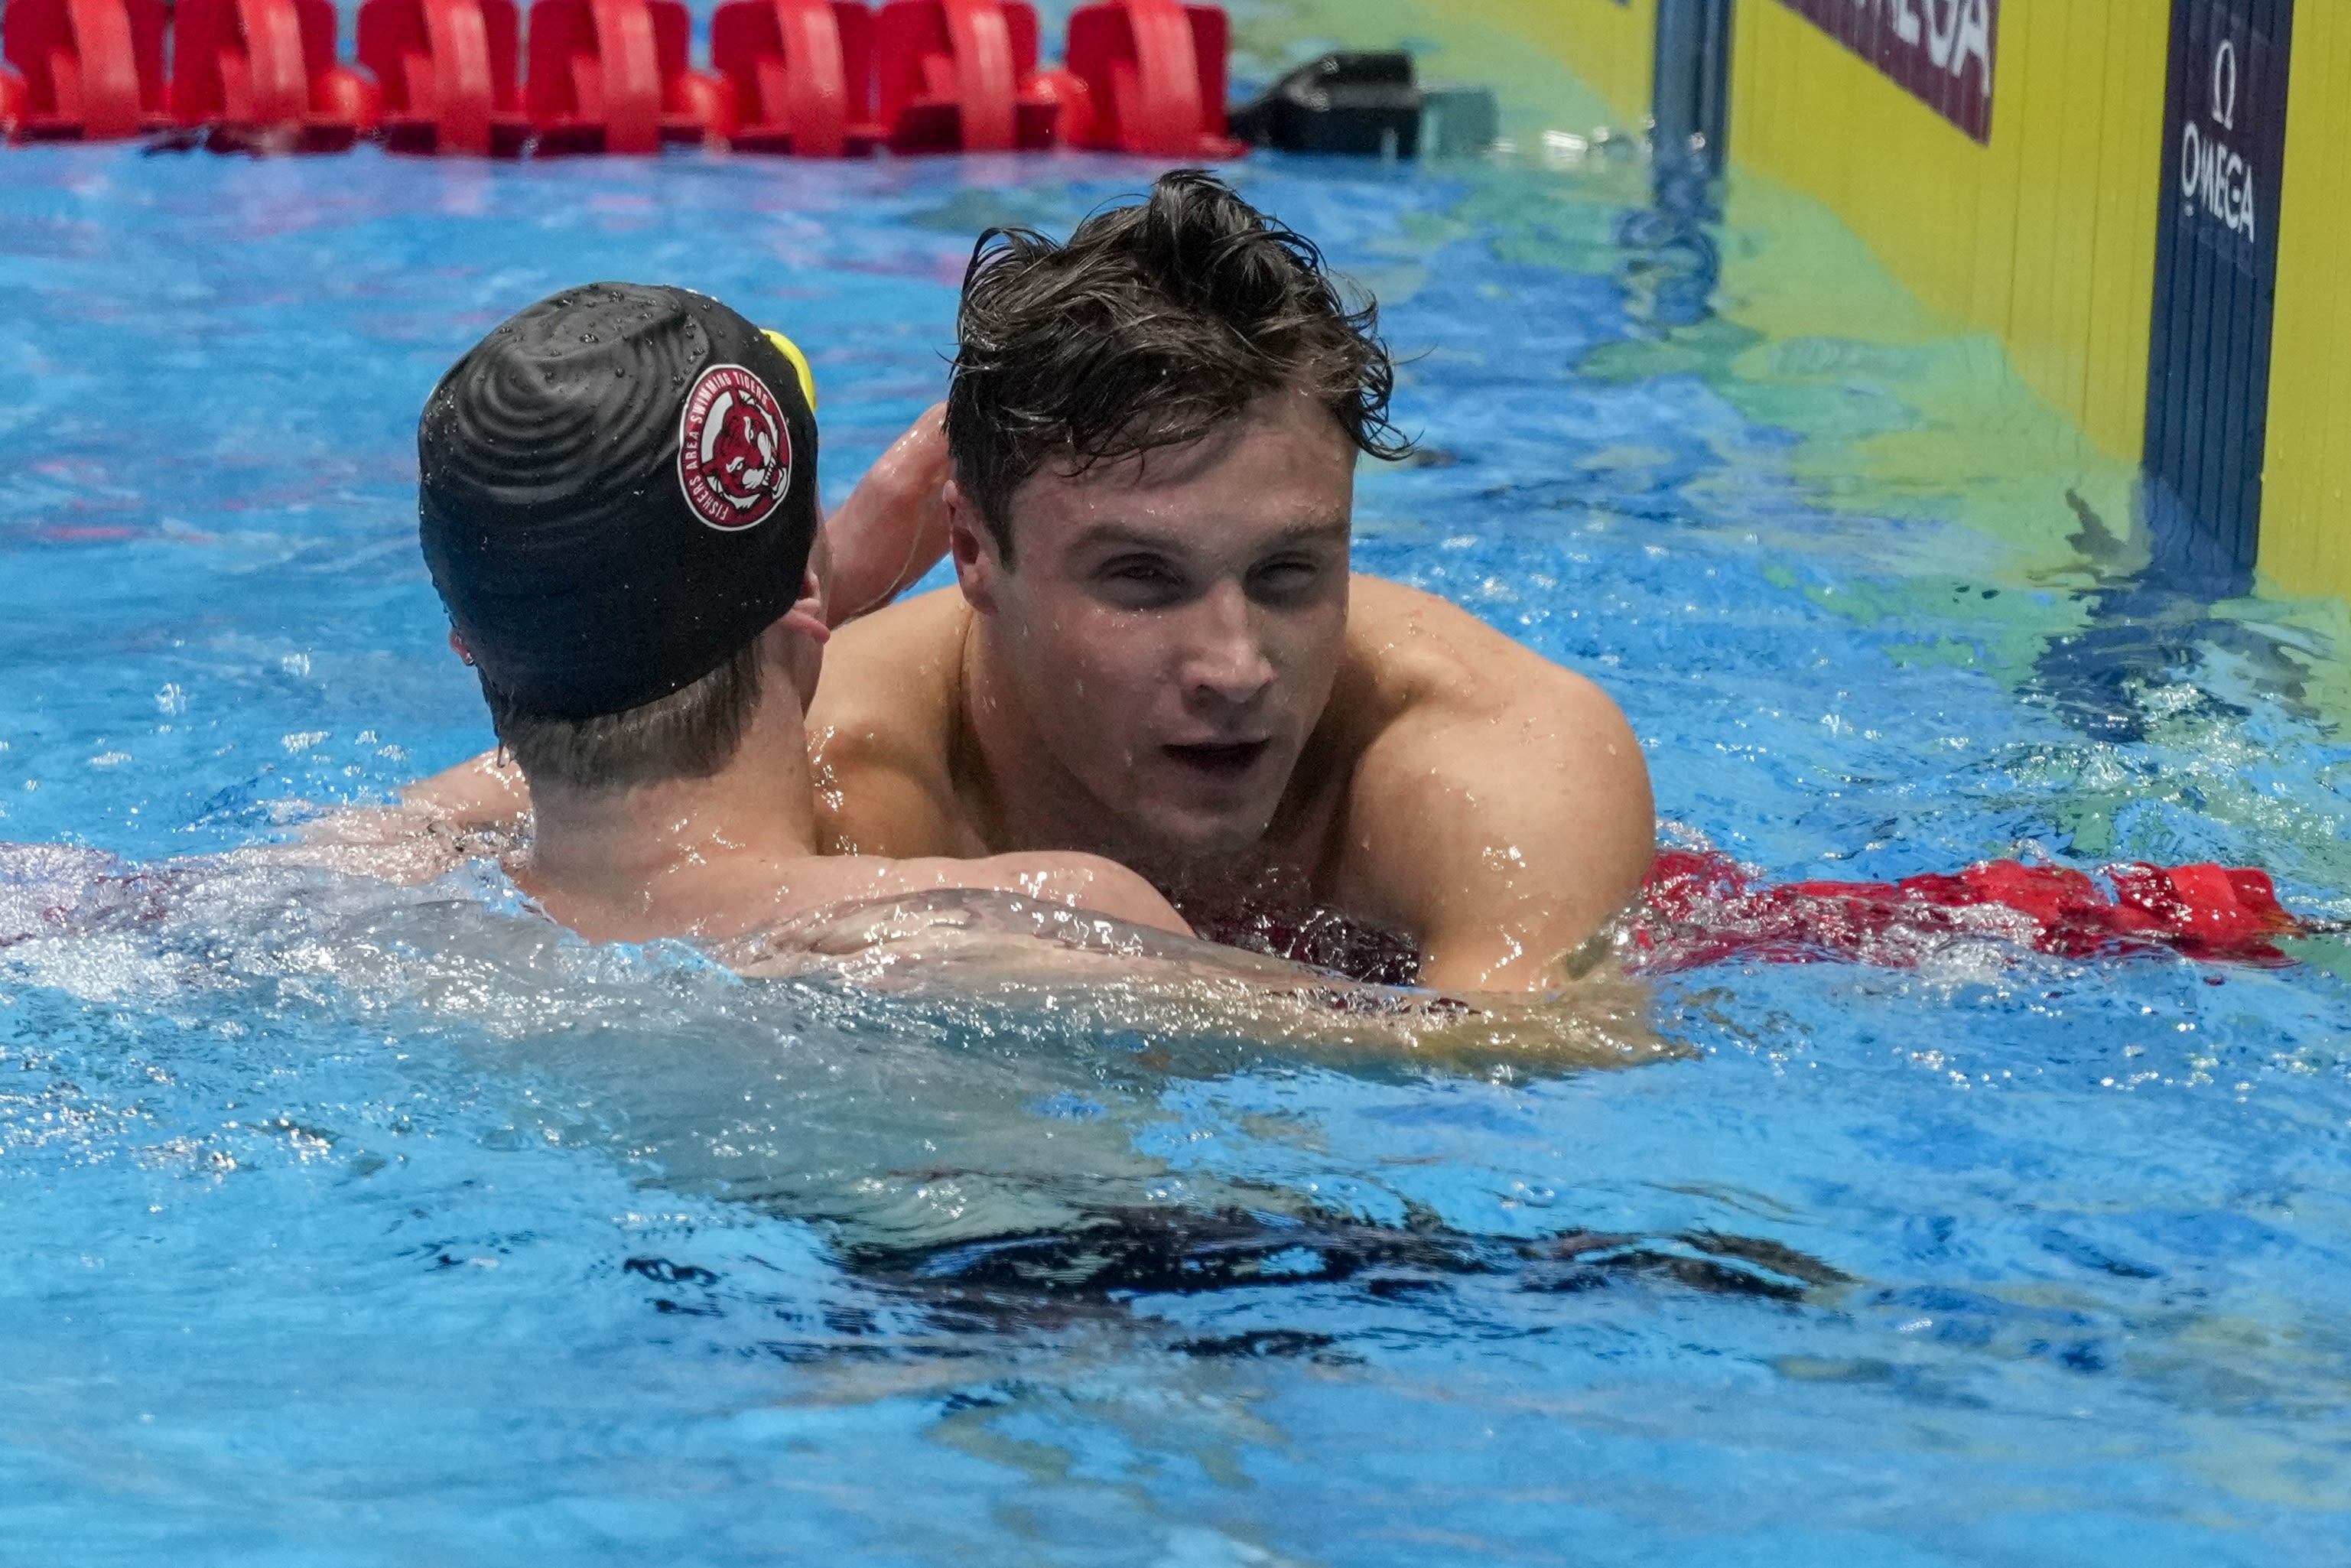 Luke Whitlock delivers on Olympic dream by teaming up with Bobby Finke on U.S. distance swim team